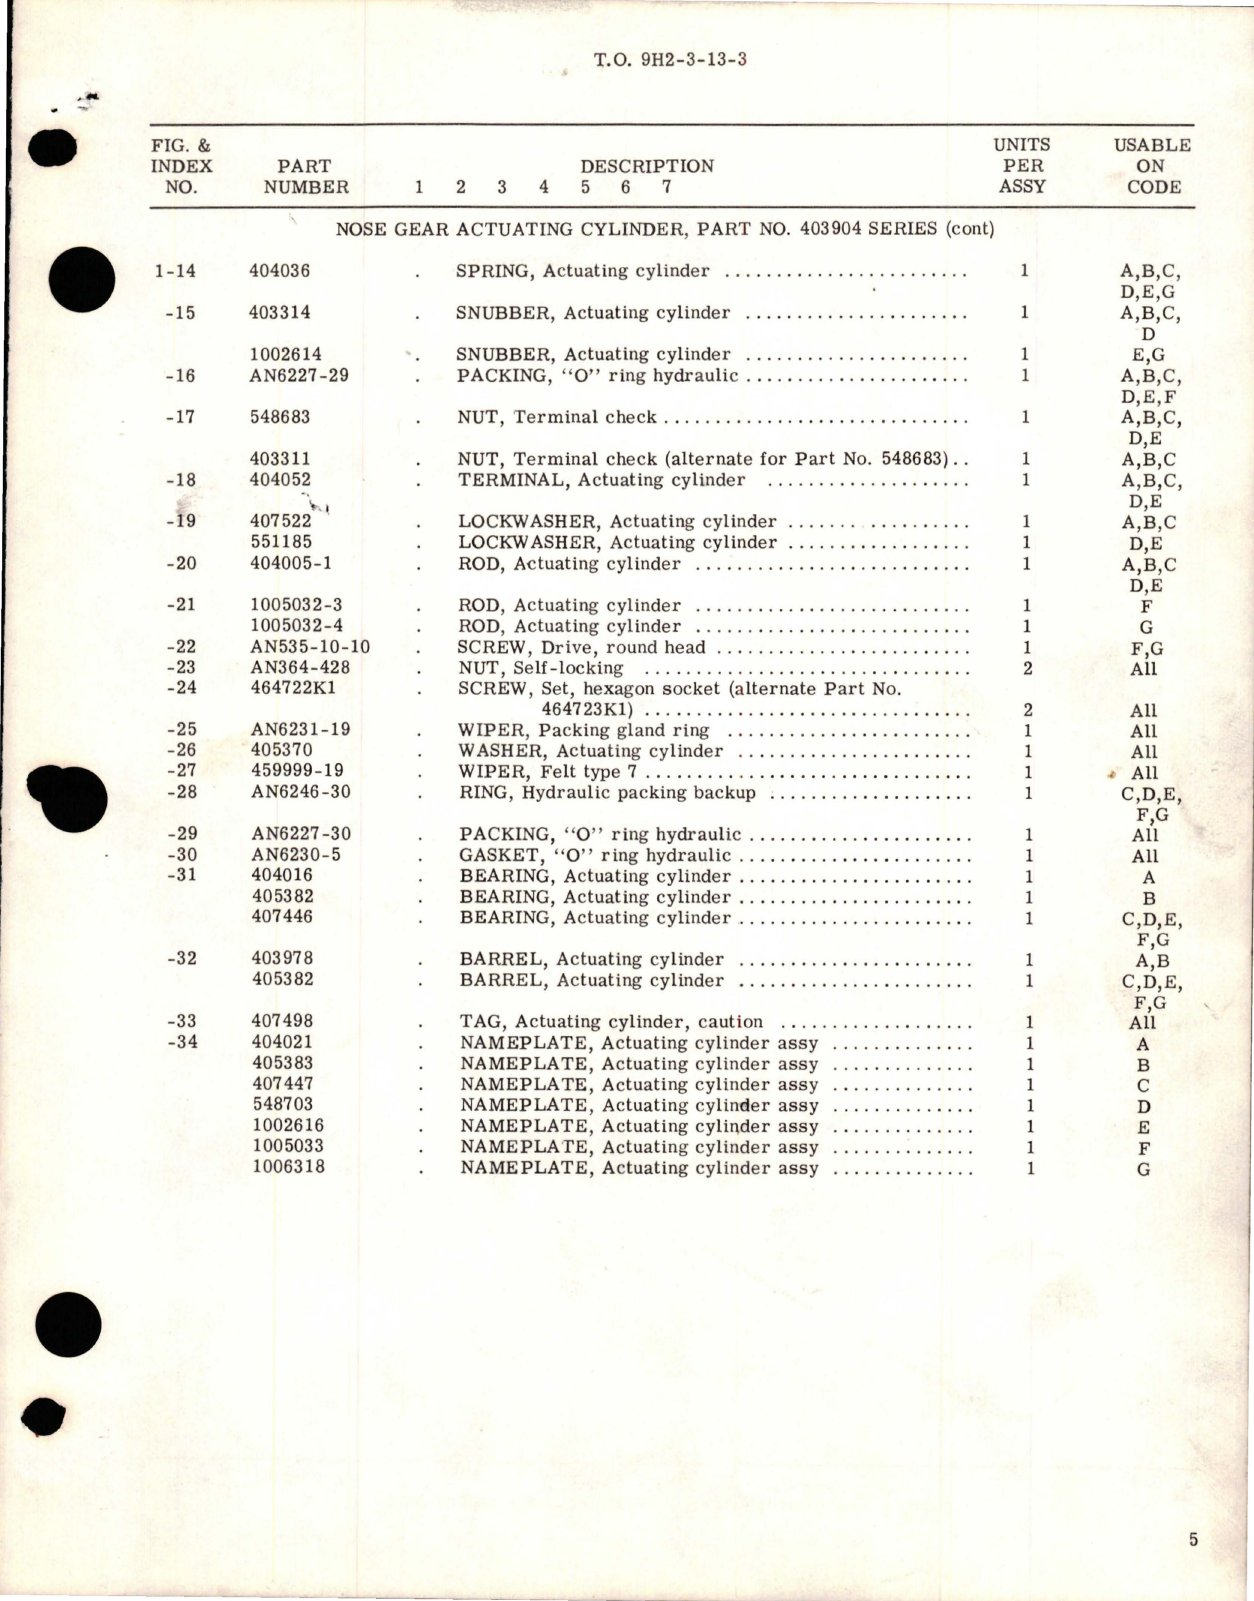 Sample page 5 from AirCorps Library document: Overhaul Instructions with Parts Breakdown for Nose Landing Gear Hydraulic Actuating Cylinders